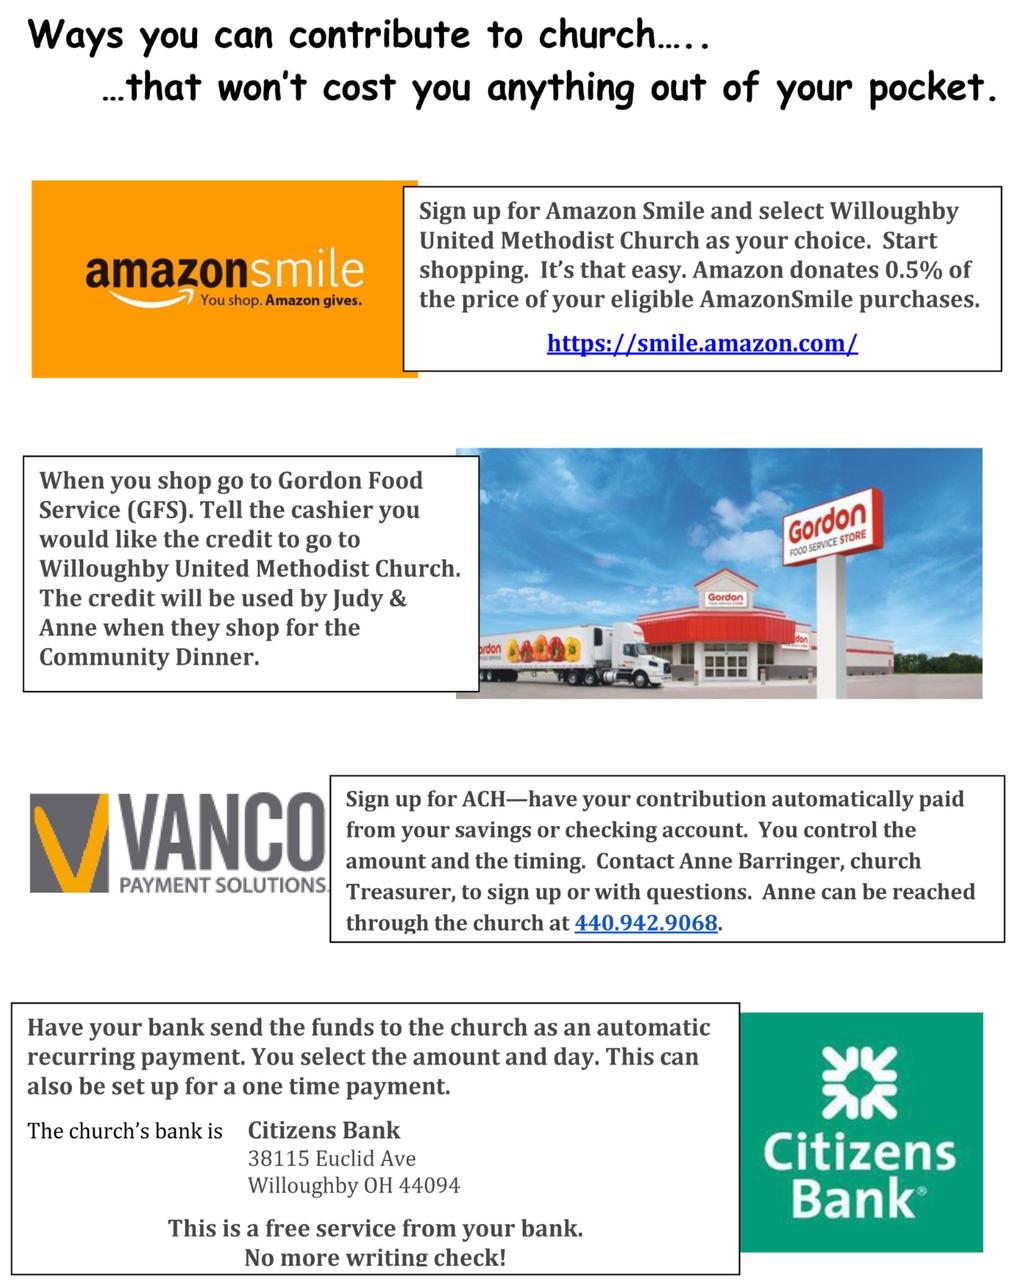 (Info on the Vanco Give-Plus